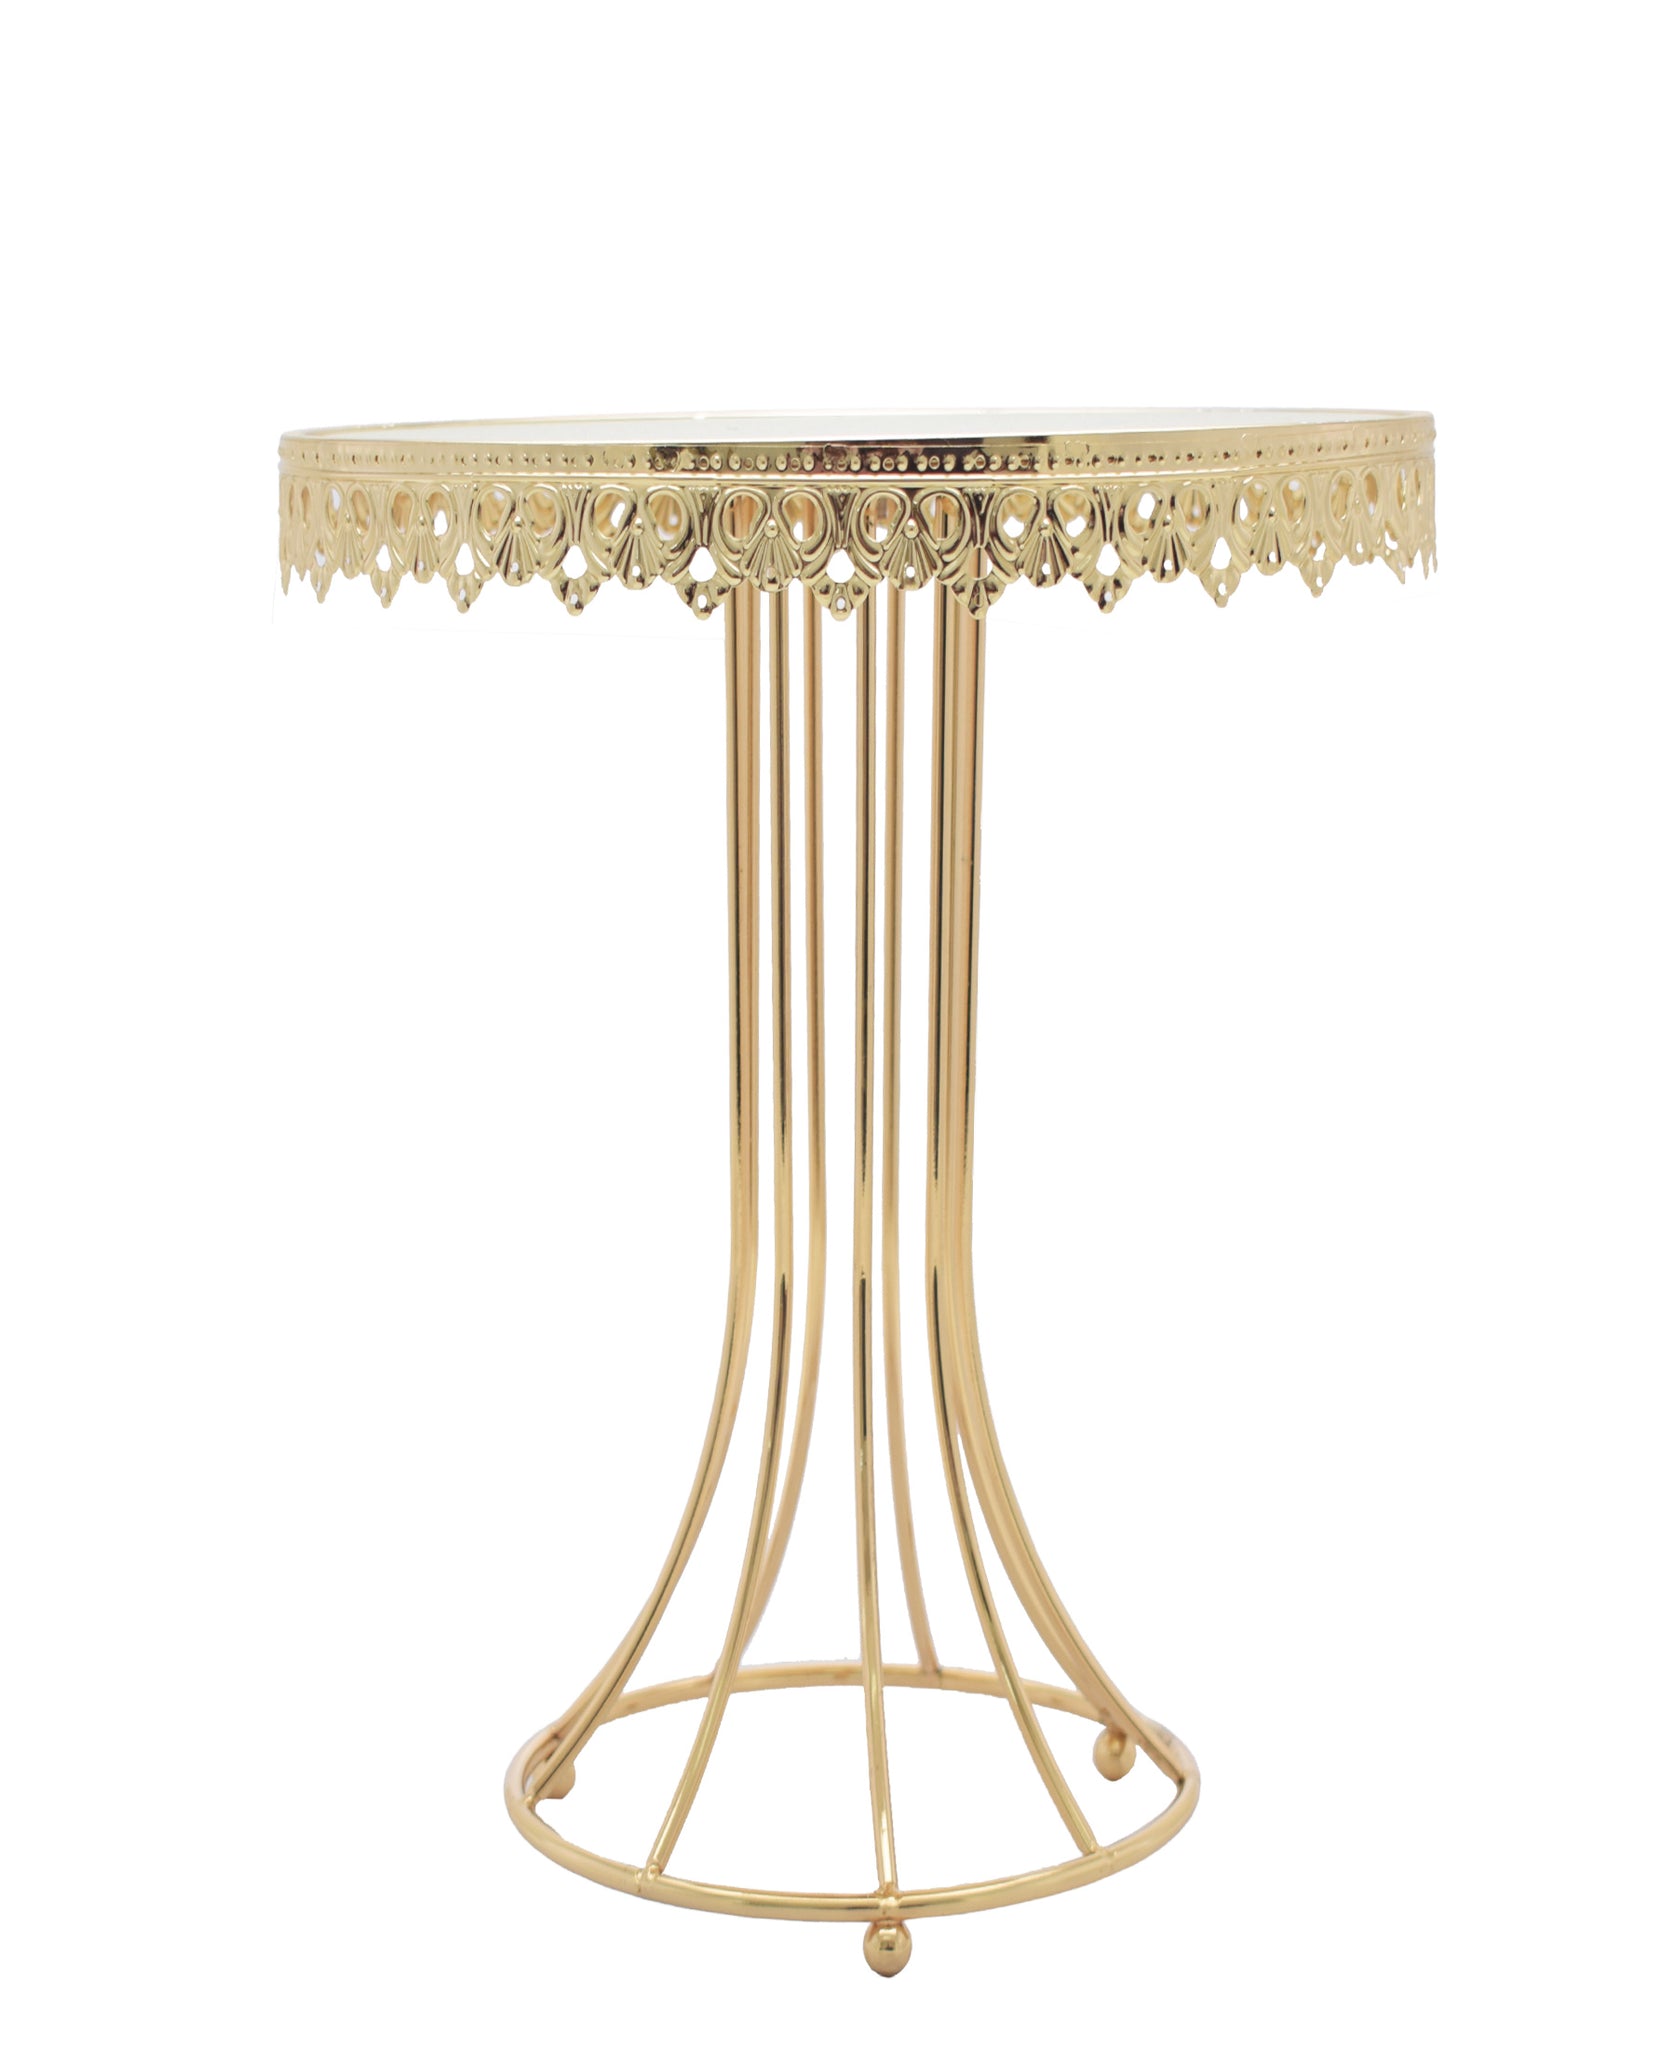 CAKE STAND ANTIQUE BRONZE 30 TABLETOP